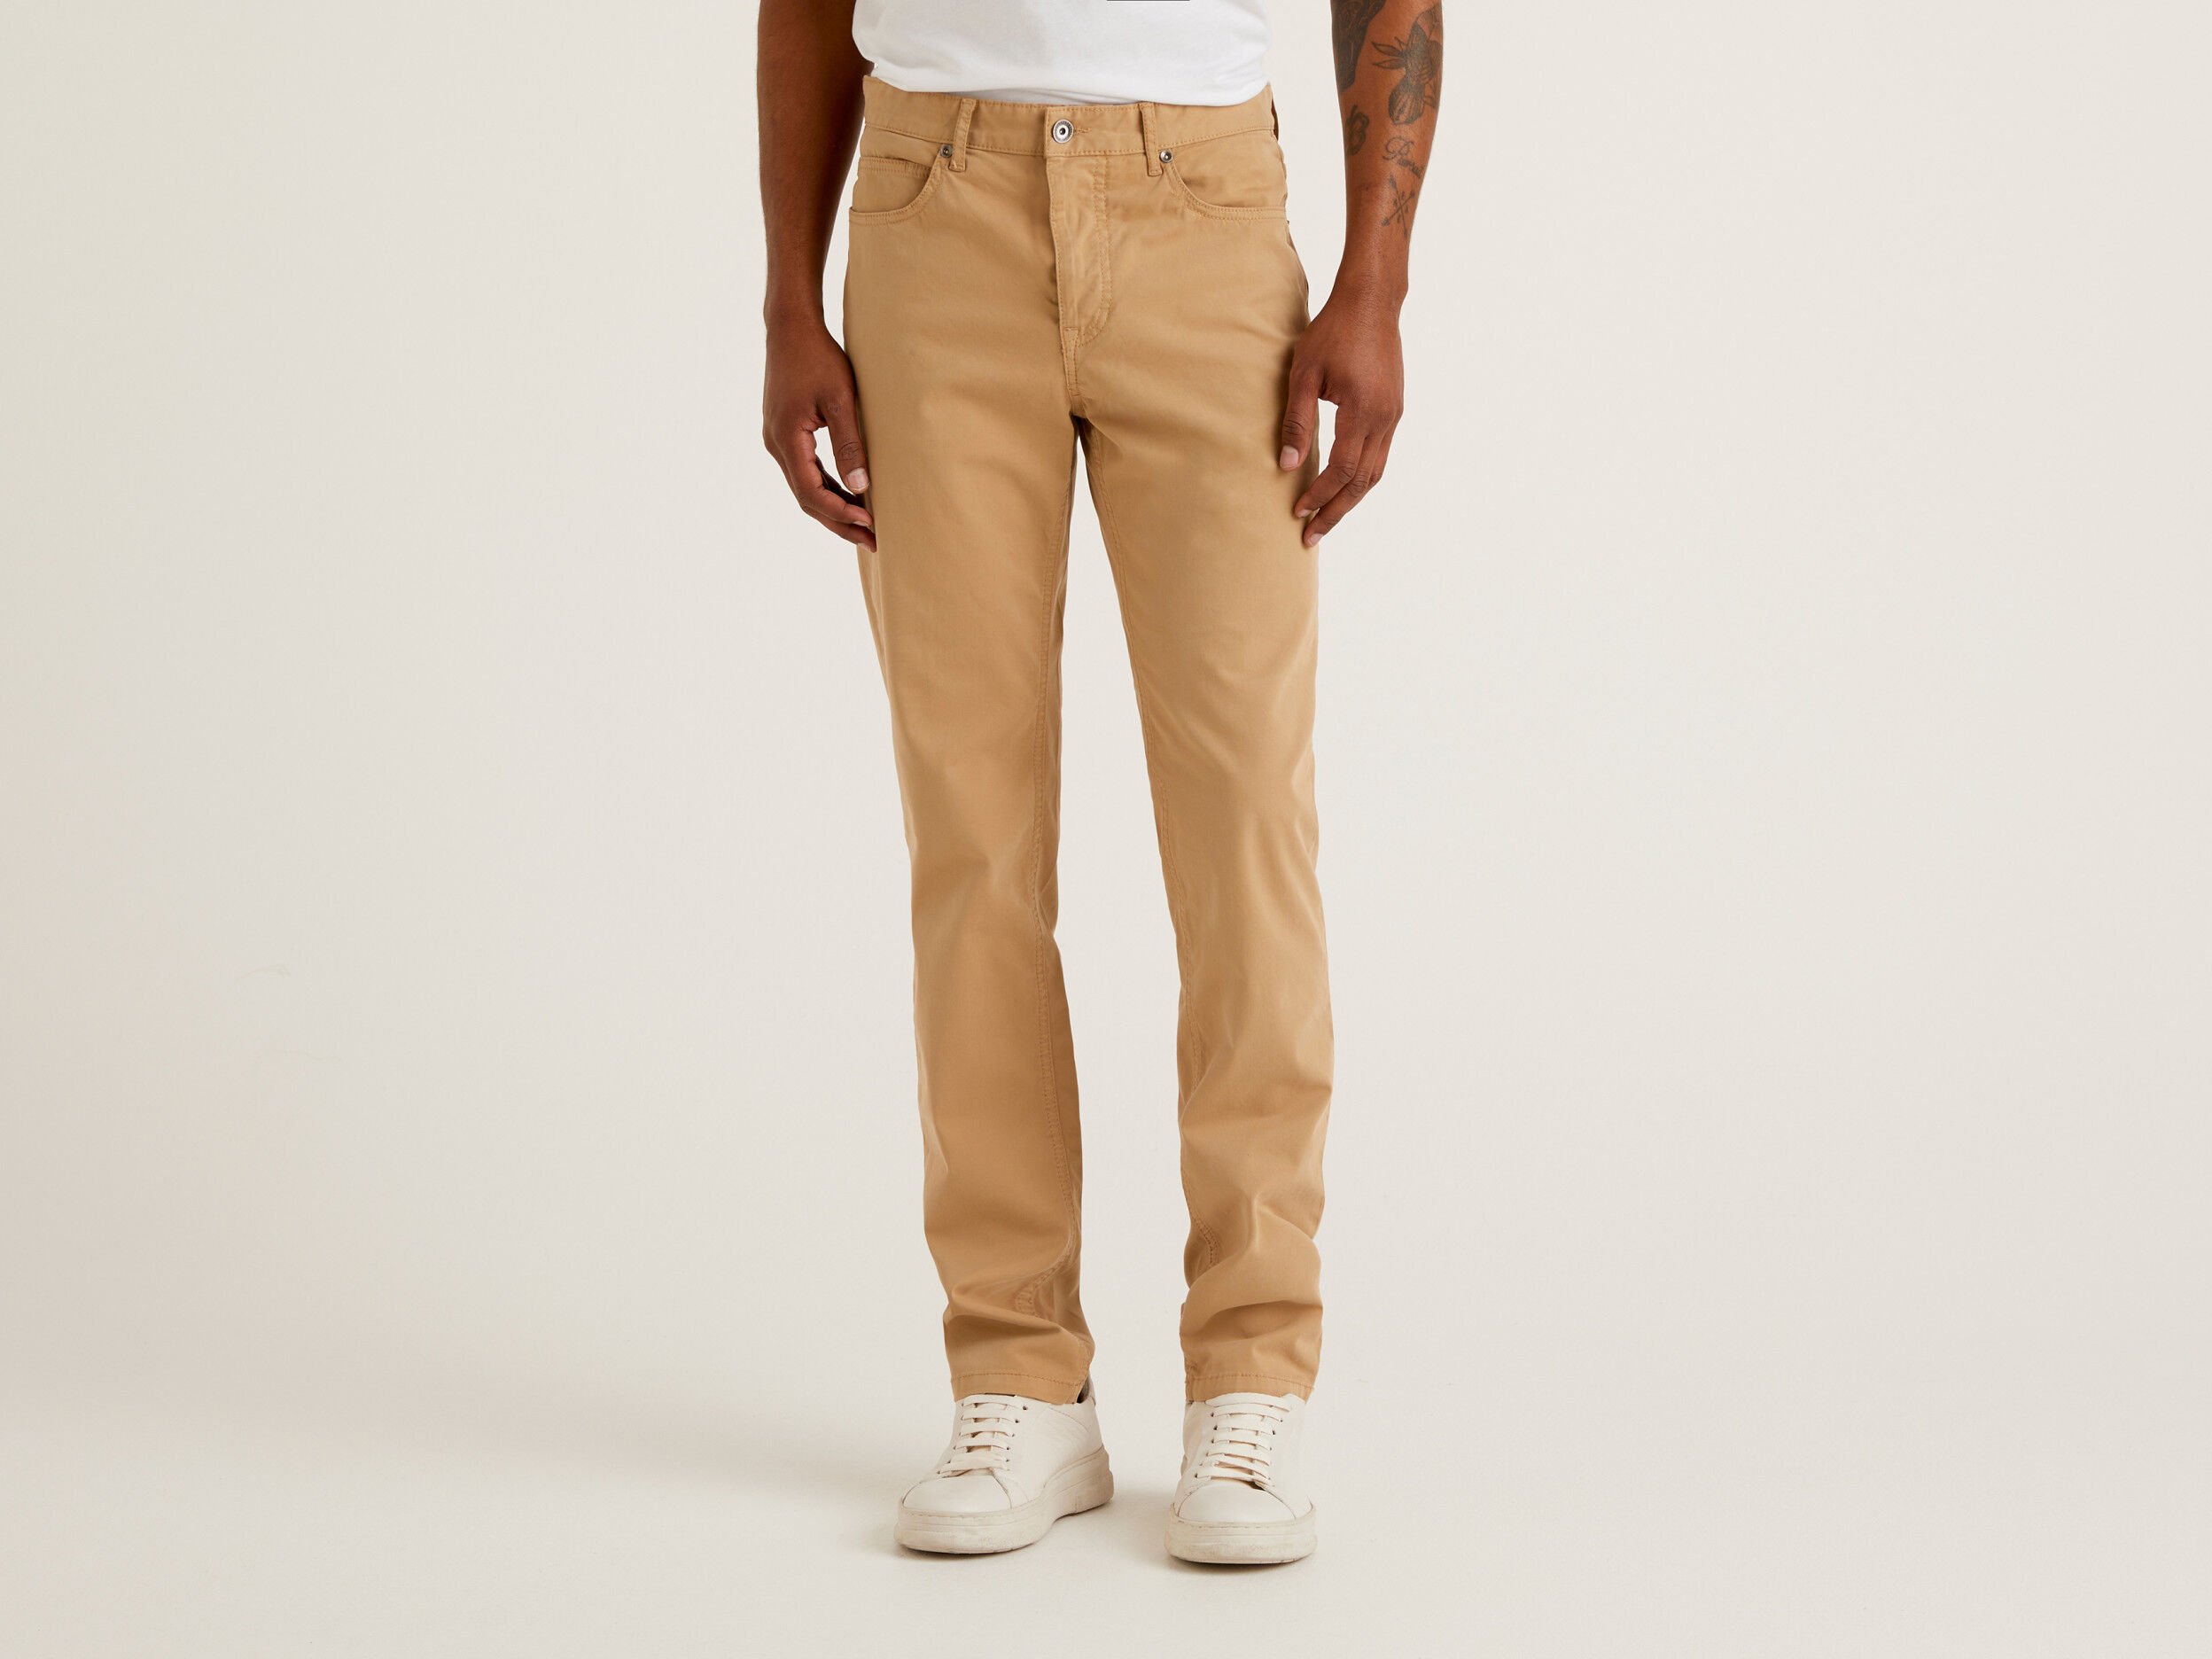 O'Connell's 5-Pocket Canvas Trousers - Khaki - Men's Clothing, Traditional  Natural shouldered clothing, preppy apparel